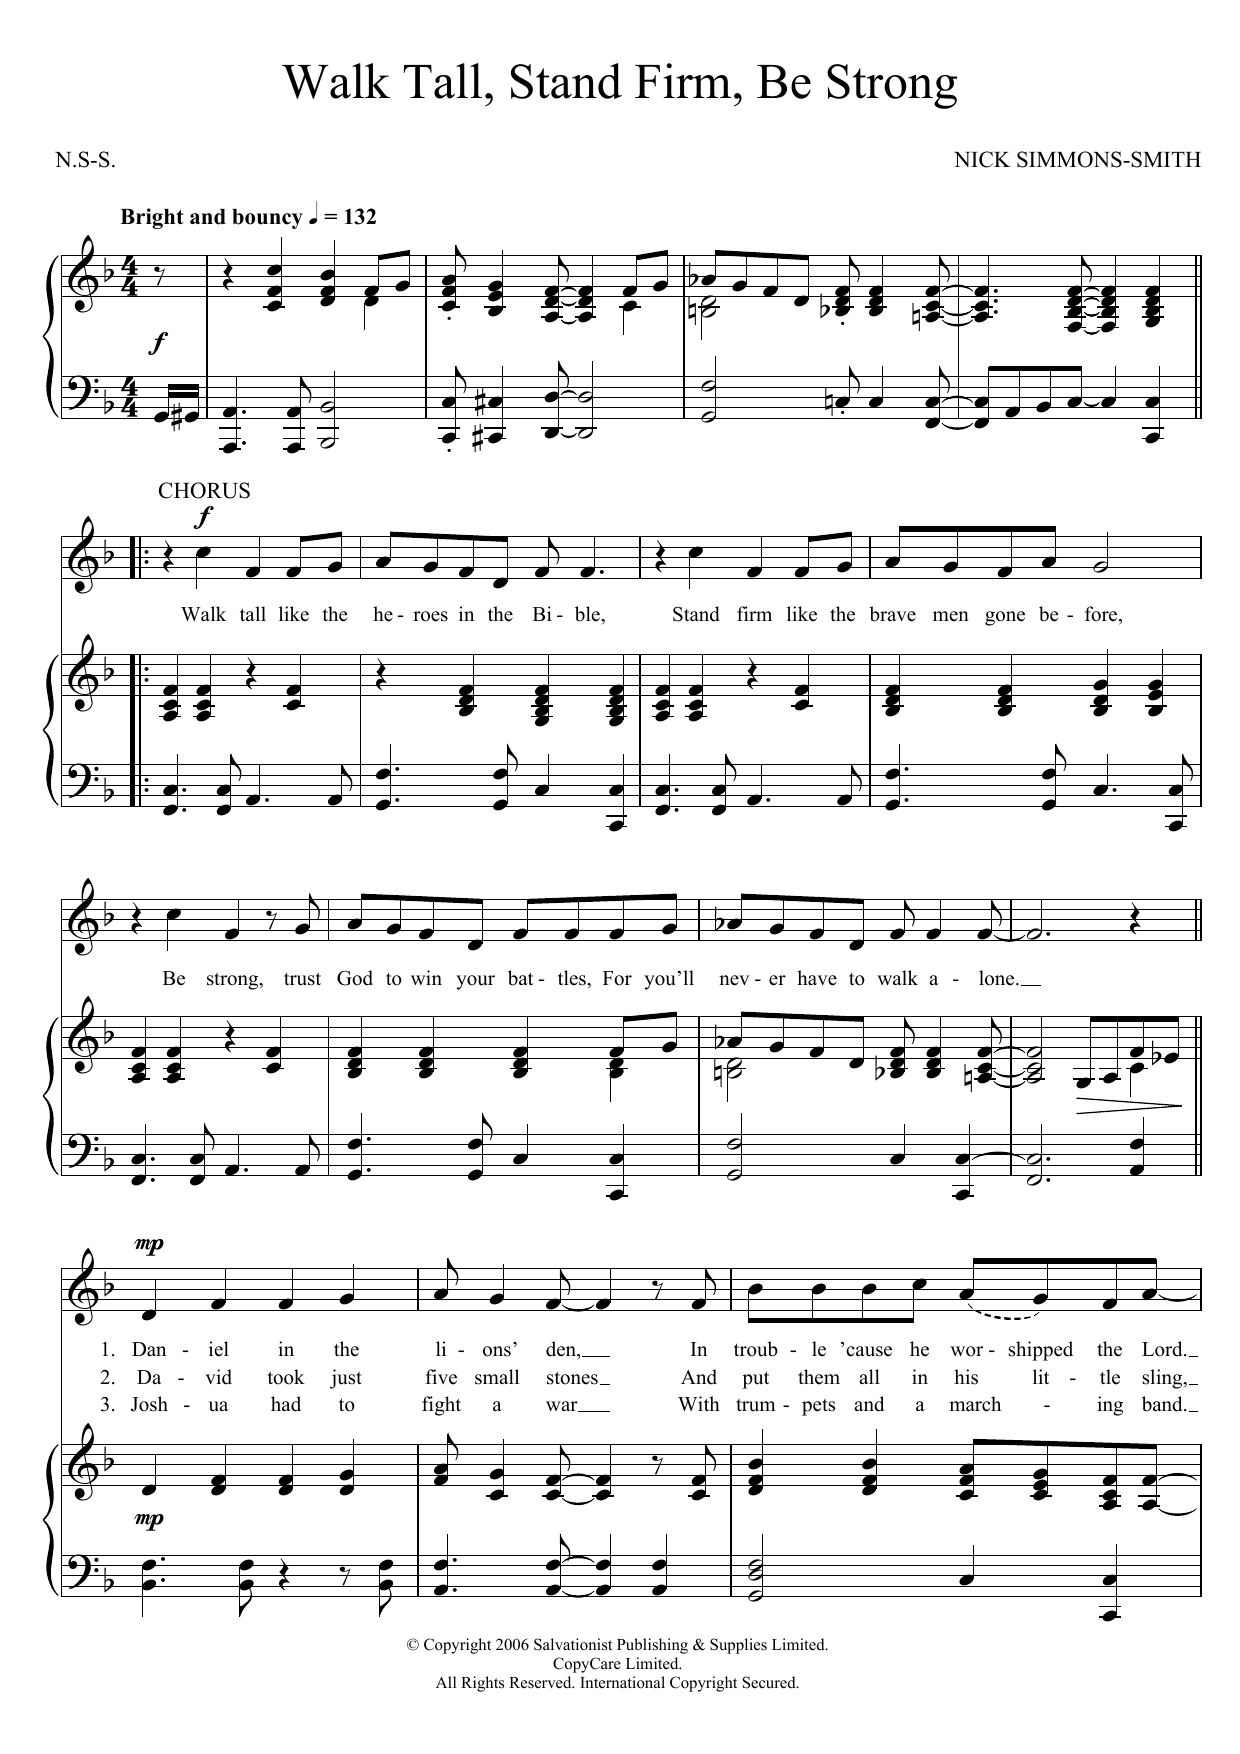 Download The Salvation Army Walk Tall, Stand Firm, Be Strong Sheet Music